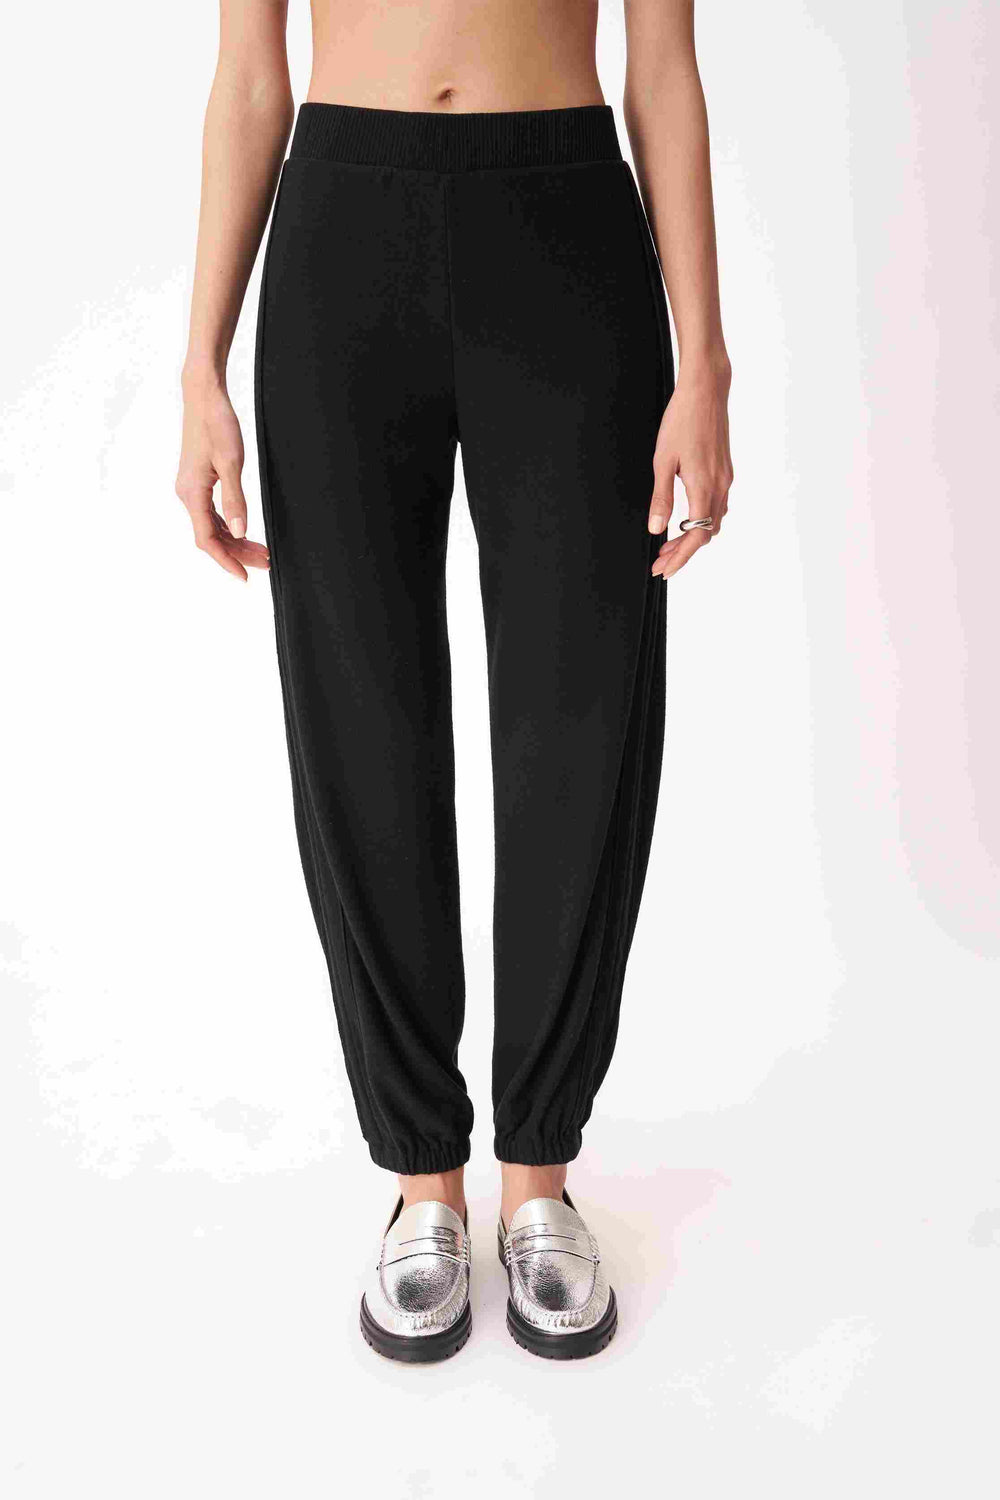 JUST RELAX COZY SEAMED JOGGER-BLACK - Kingfisher Road - Online Boutique